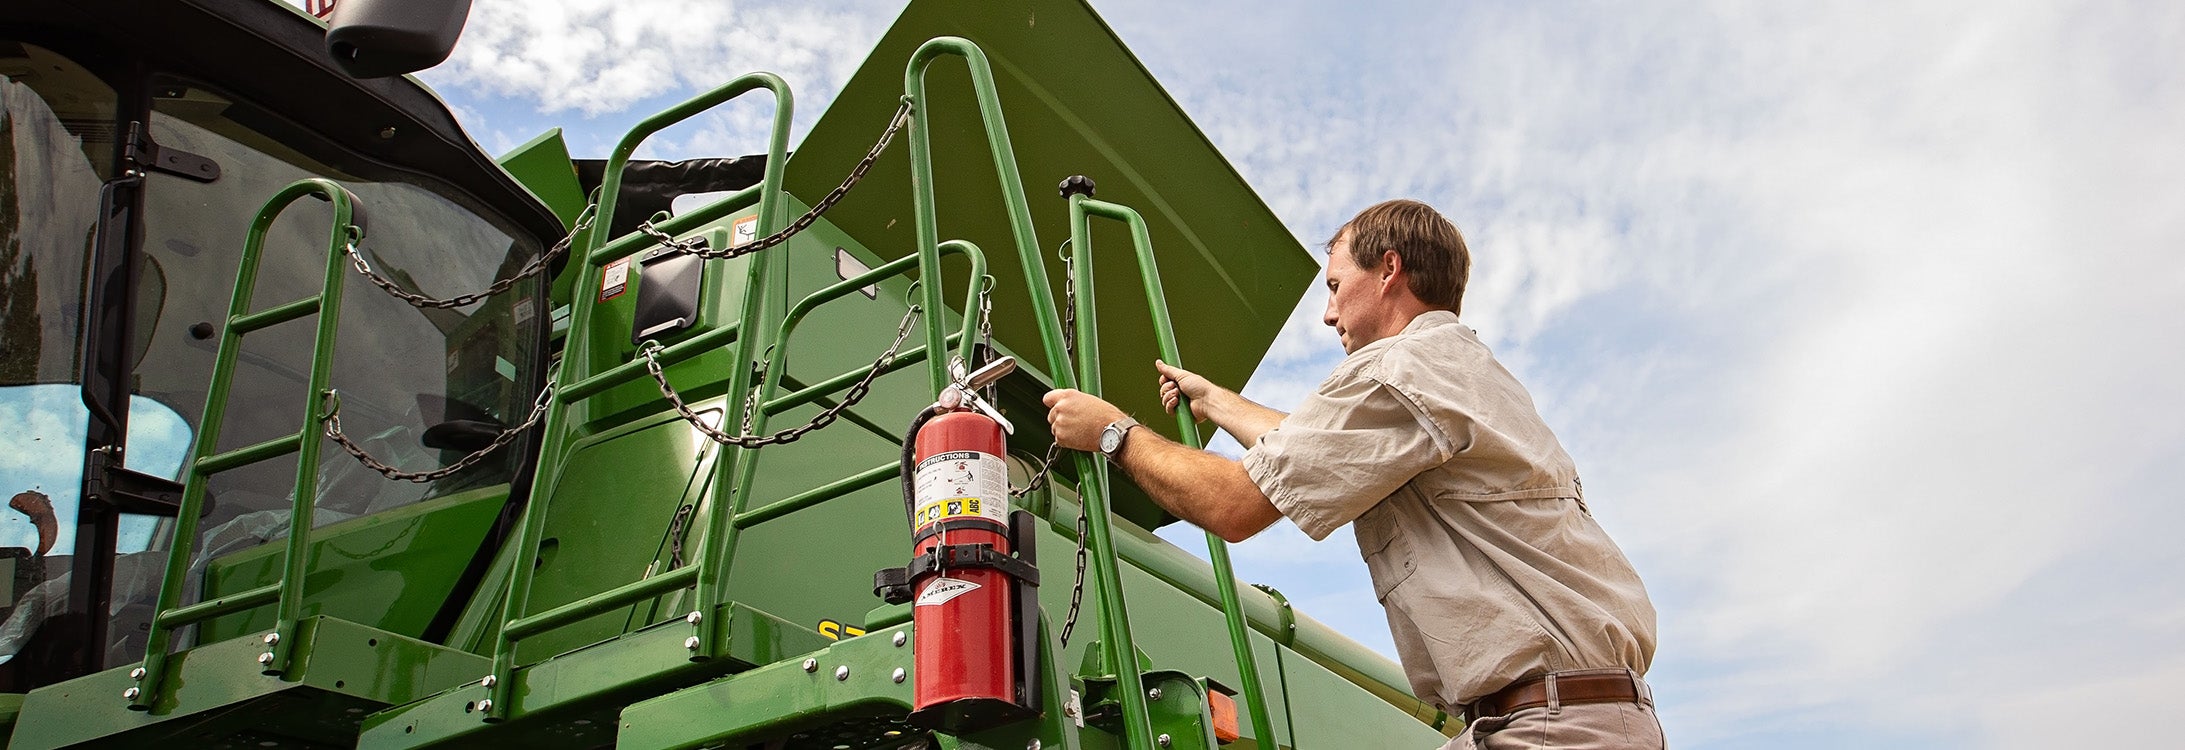 Third-generation farmer Archie Griffin operates a combine on his family’s farm in Washington, North Carolina.